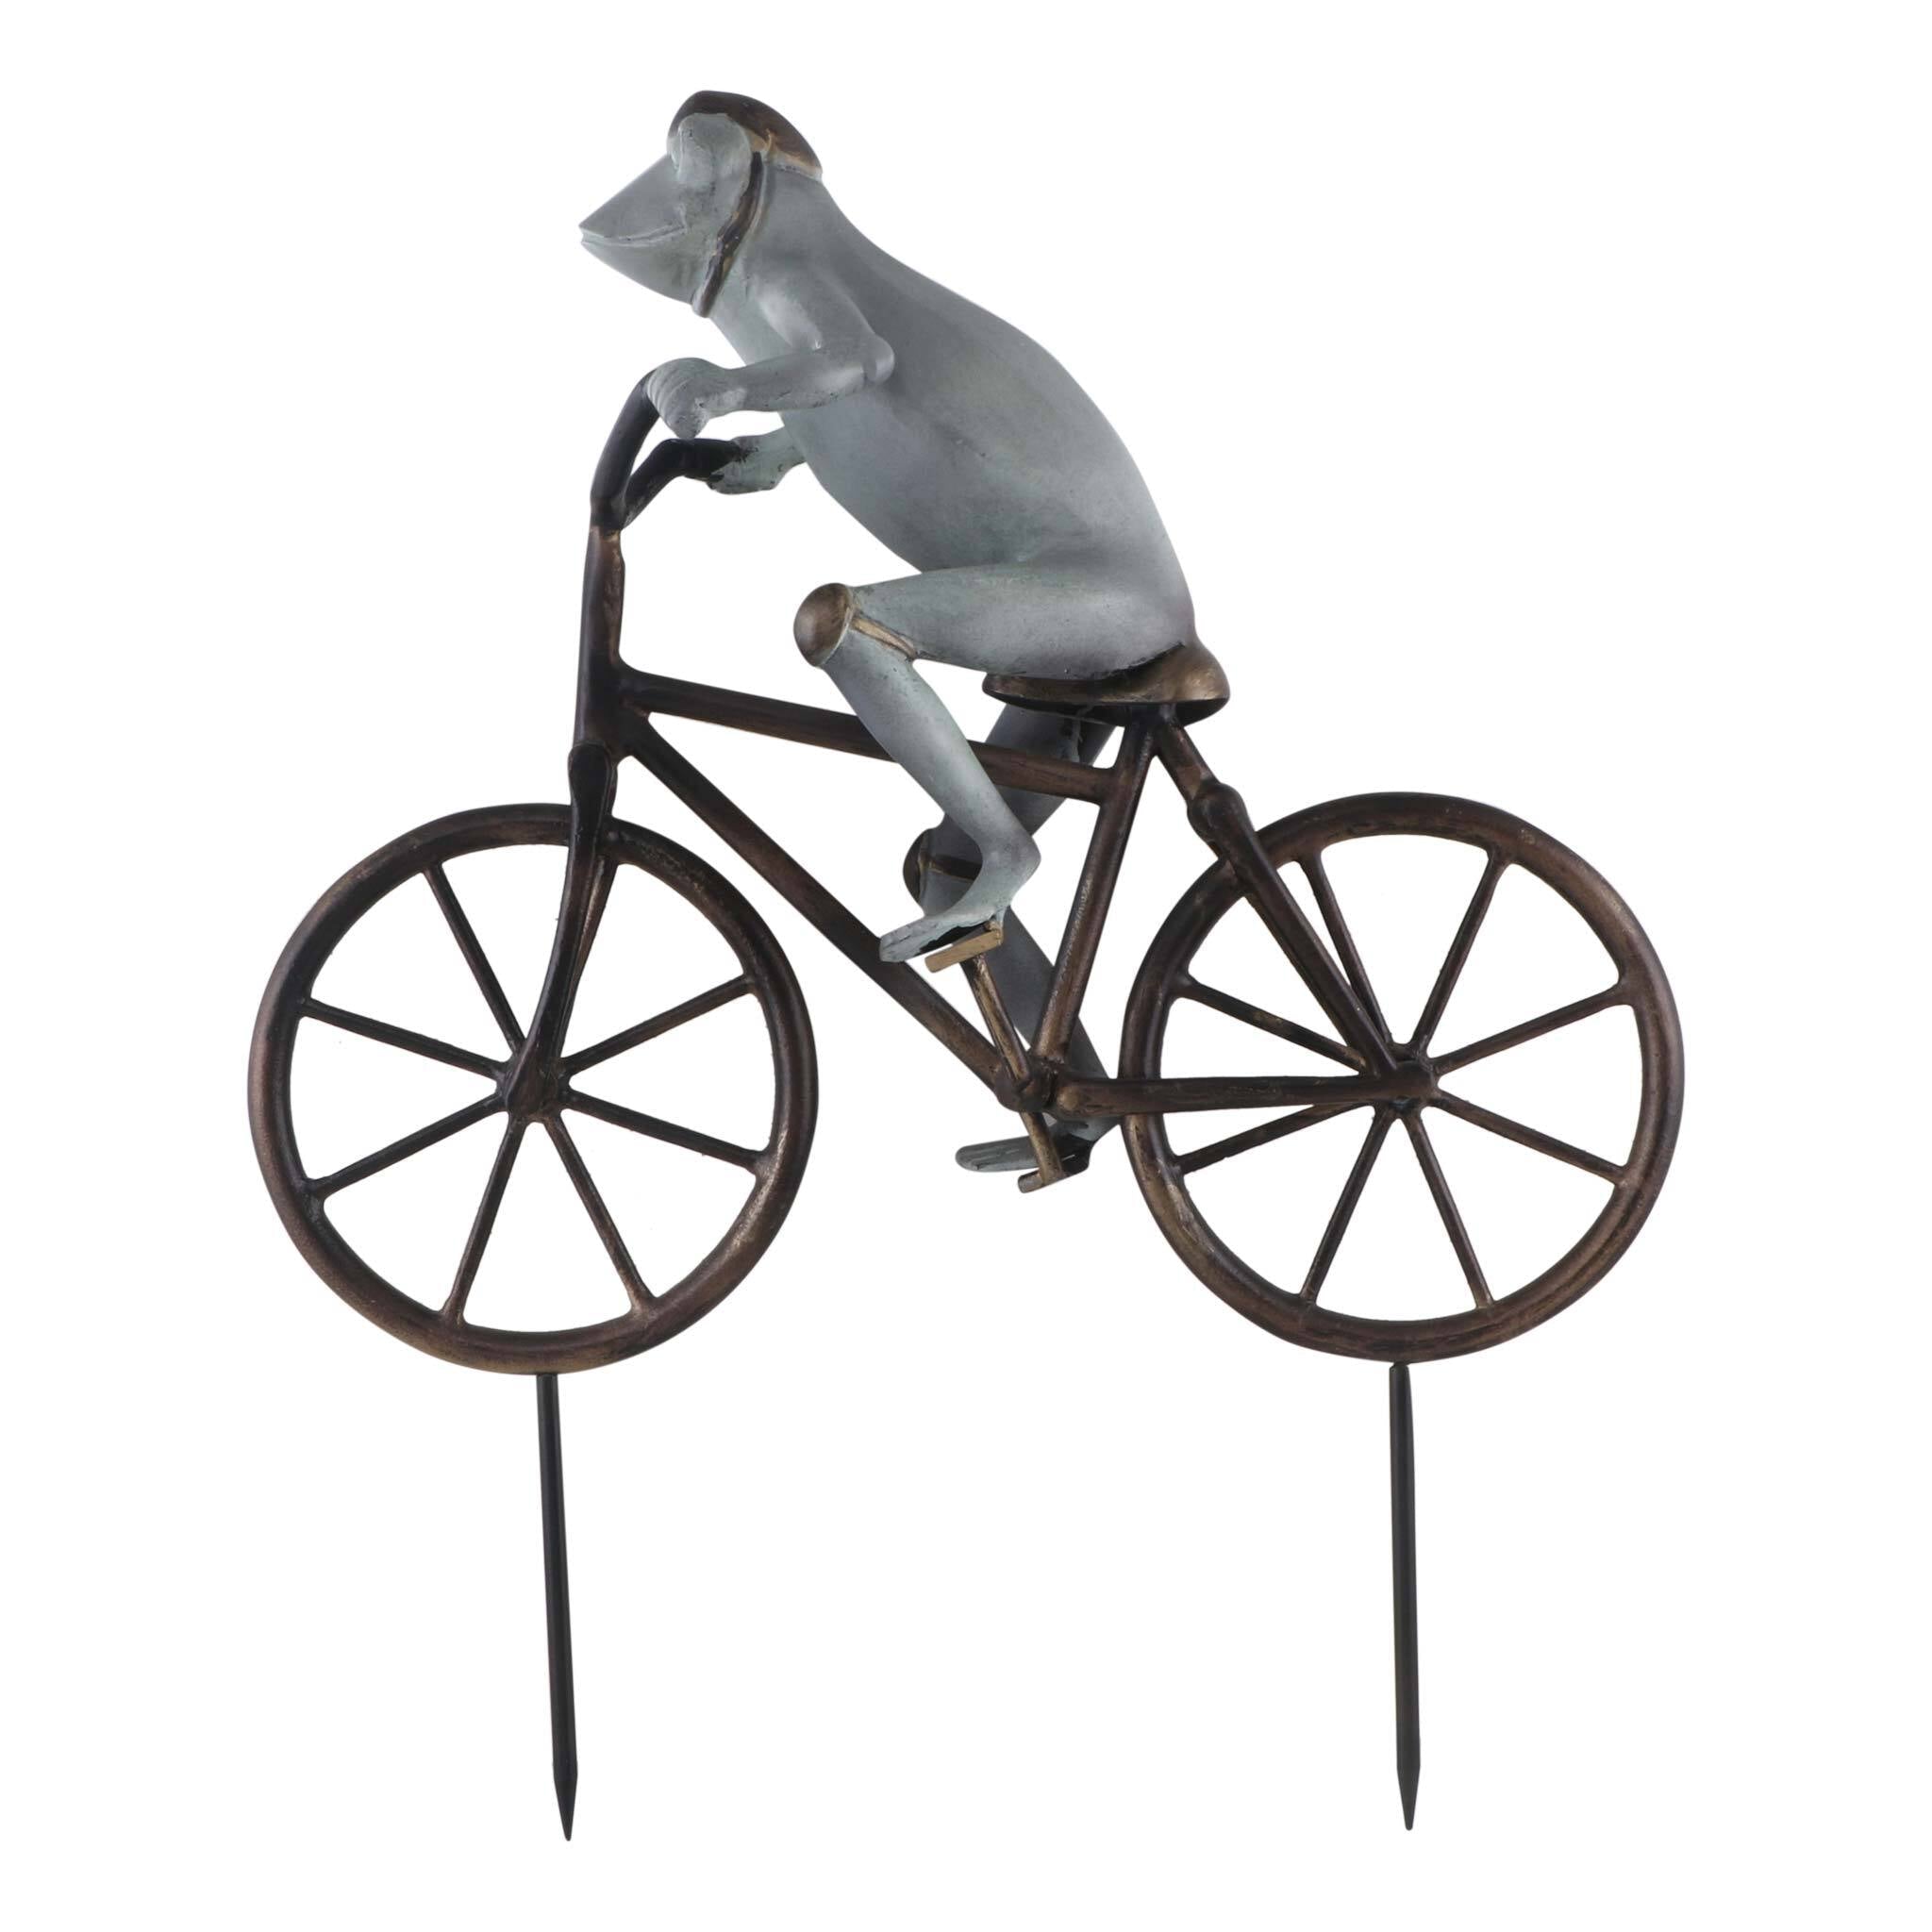 SPI Home Home Frog on Bicycle Garden Sculpture